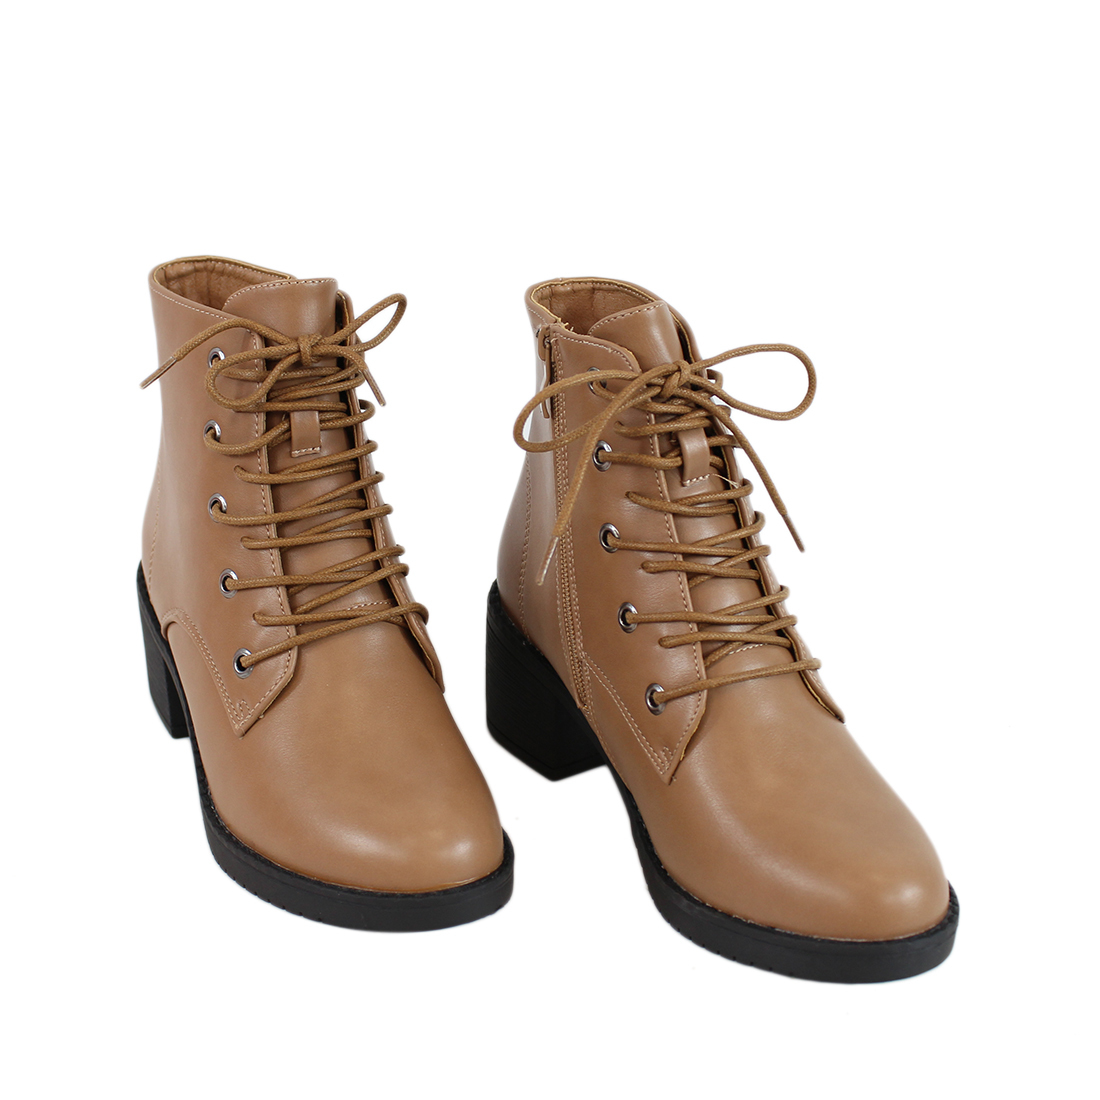 Lace up Hiker Boots